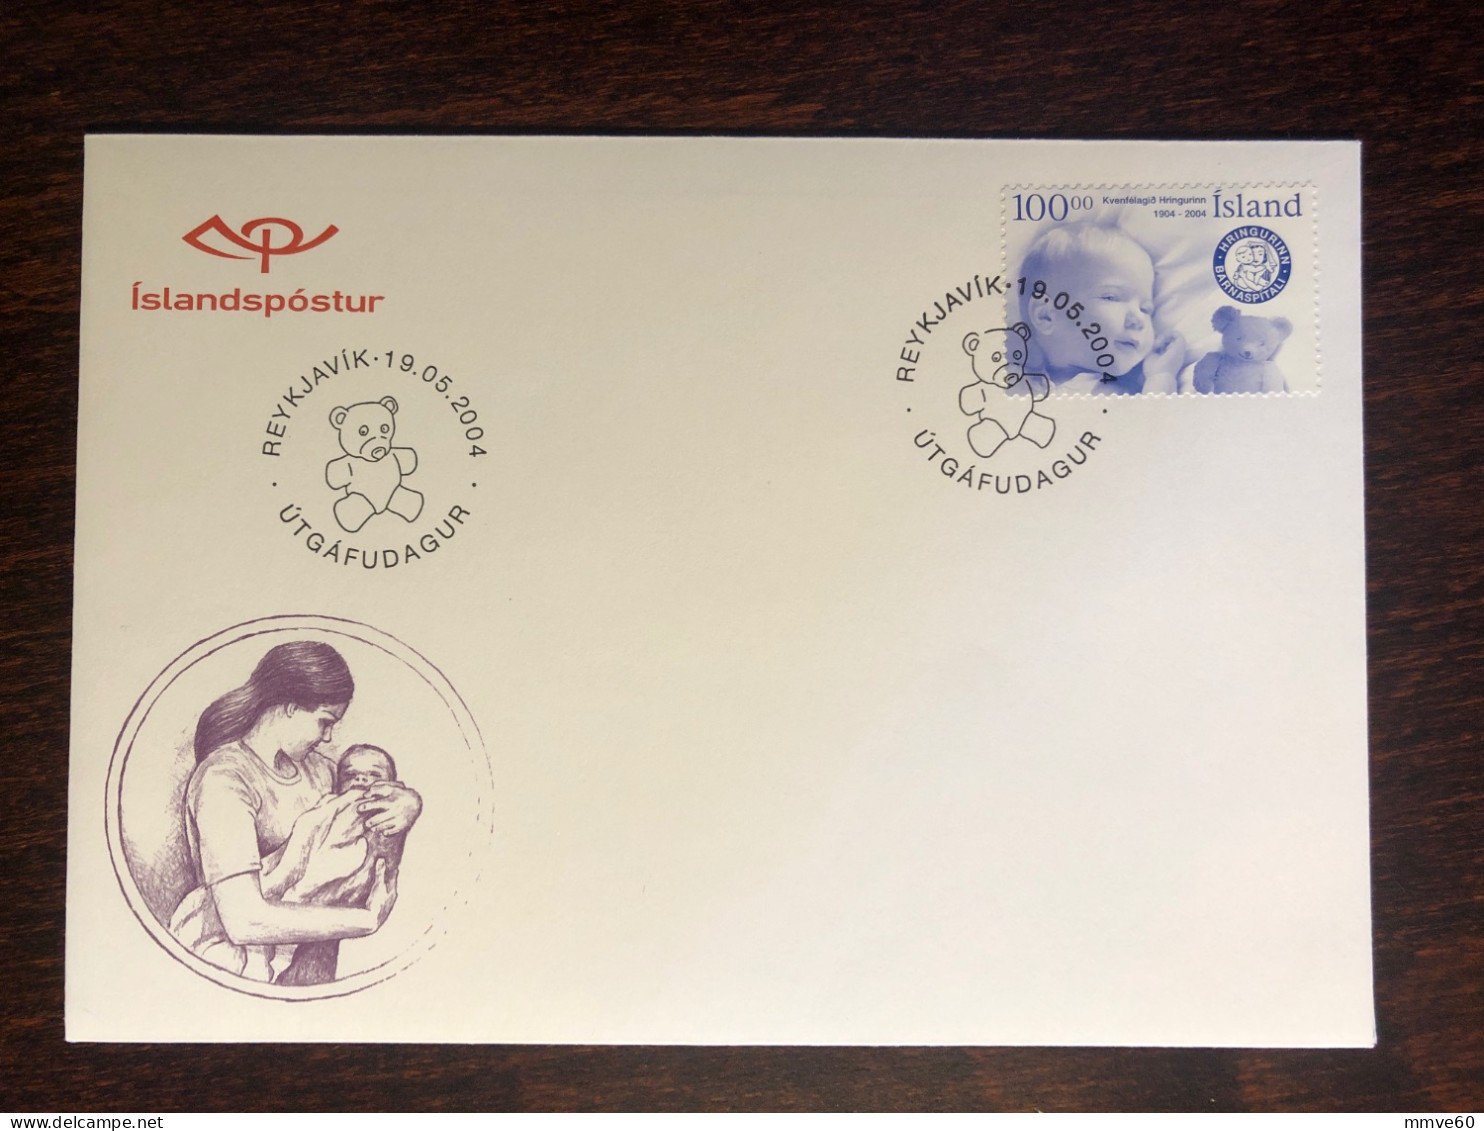 ICELAND FDC COVER 2004 YEAR PEDIATRIC CHILD HEALTH MEDICINE STAMPS - FDC